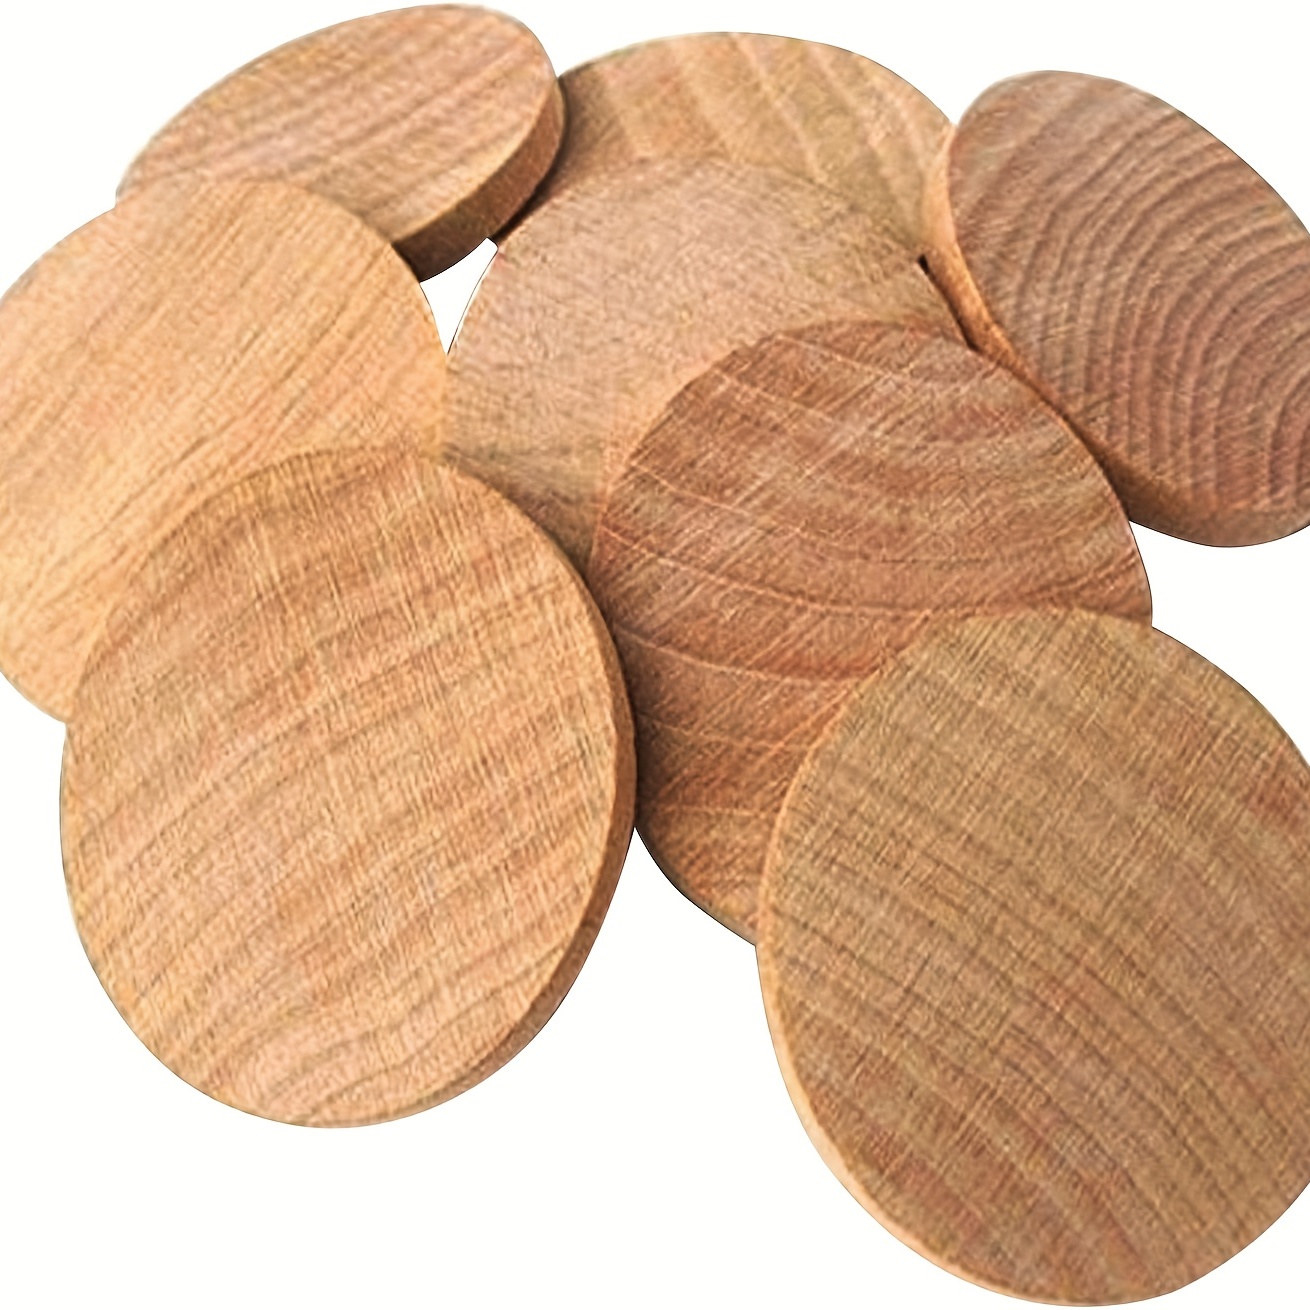 5pcs Wood Rounds For Crafts 10 Inches/25cm, Wood Circles For Crafts, Round  Wooden Discs, Circle Wood Sign Blank